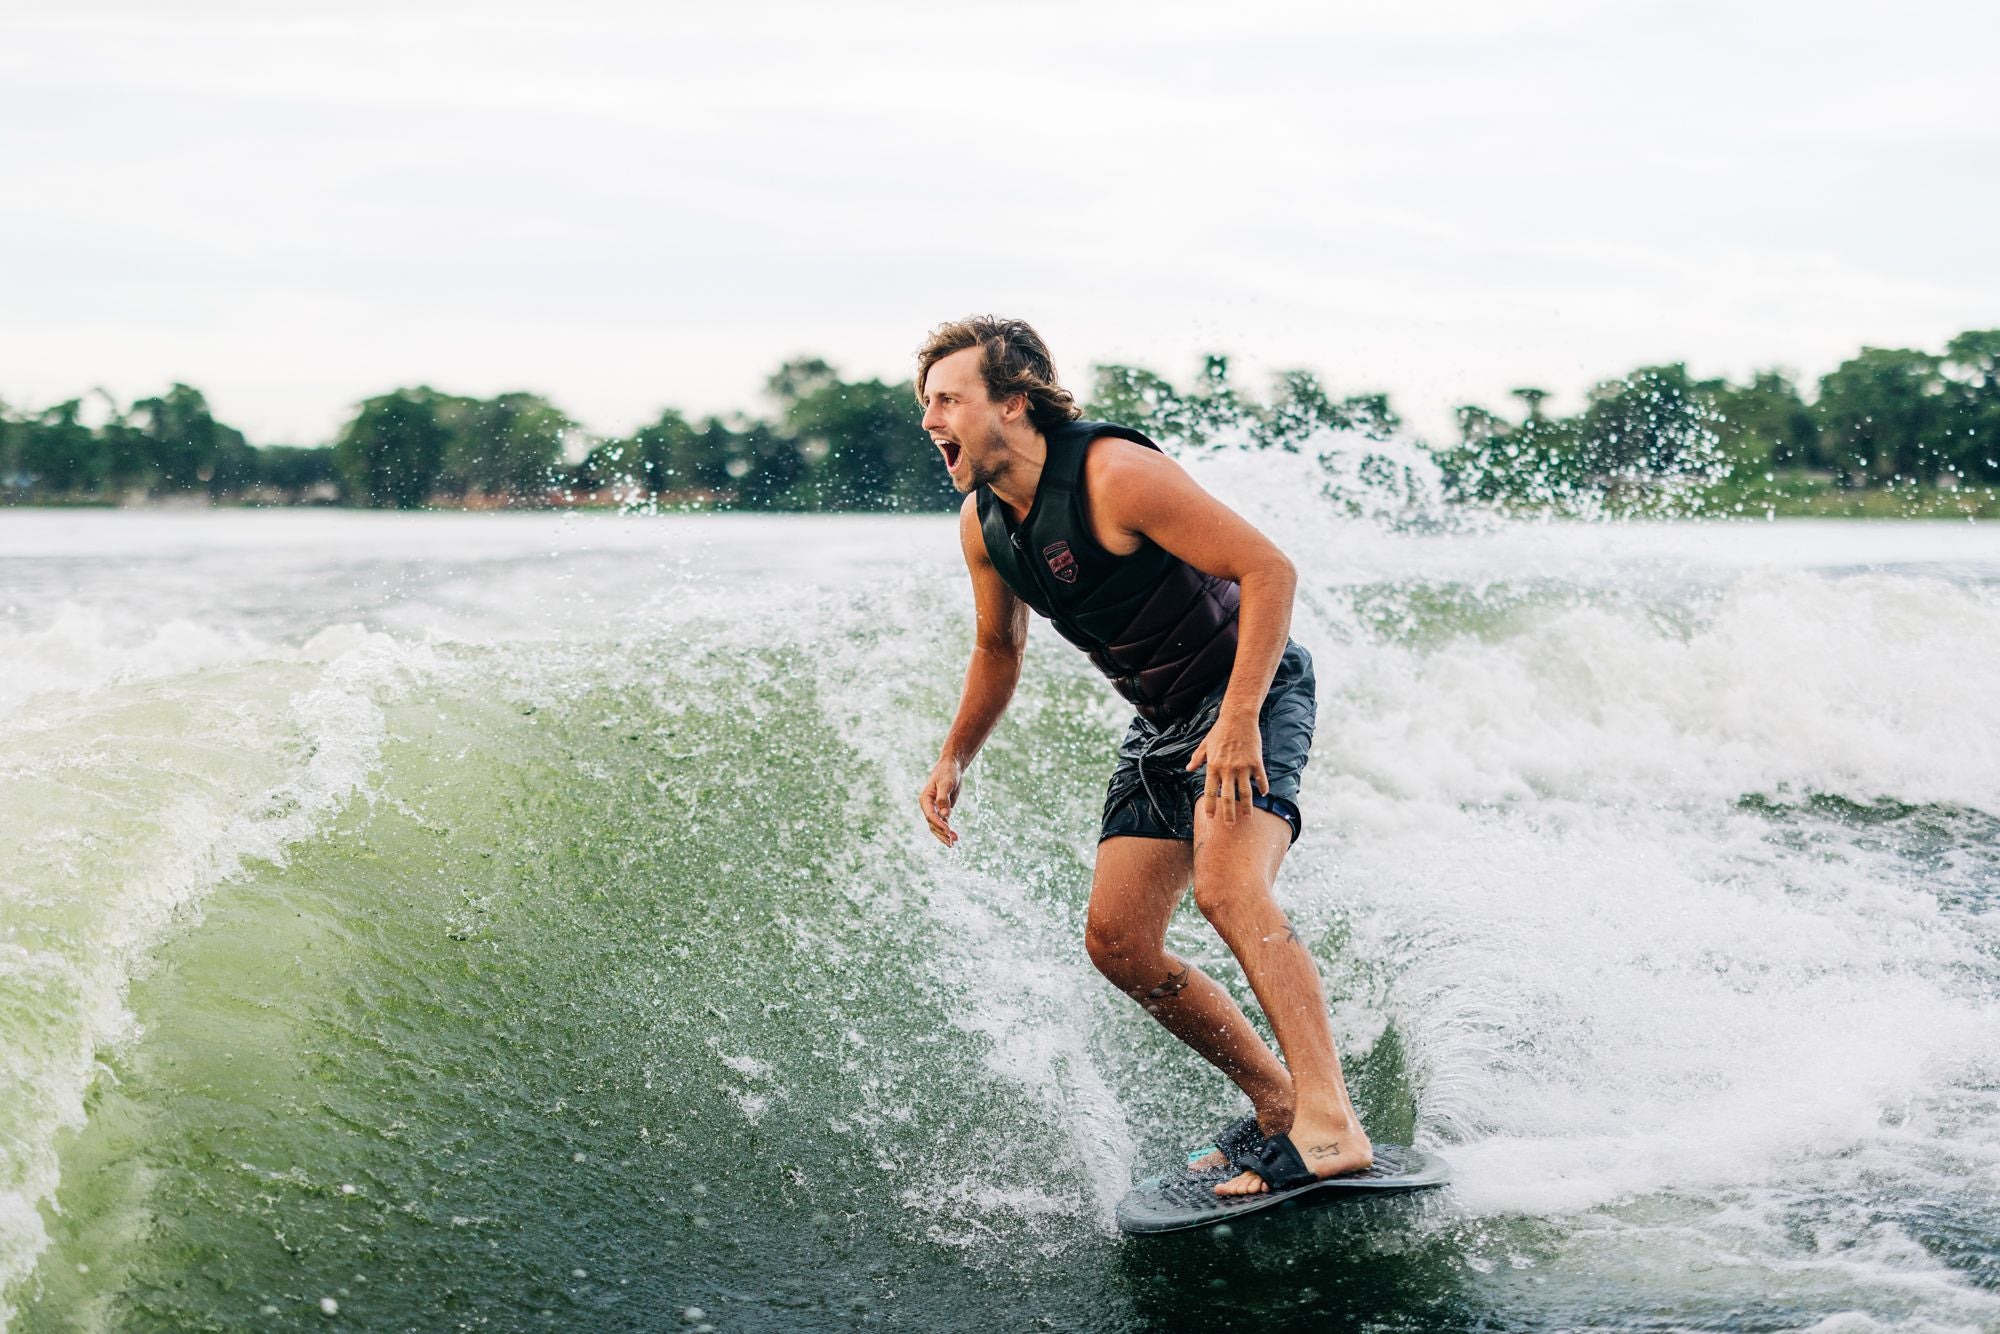 A man riding a wave on a surfboard equipped with durable foot straps, ensuring a secure Liquid Force 2023 Primo ride on the Dura-Surf.